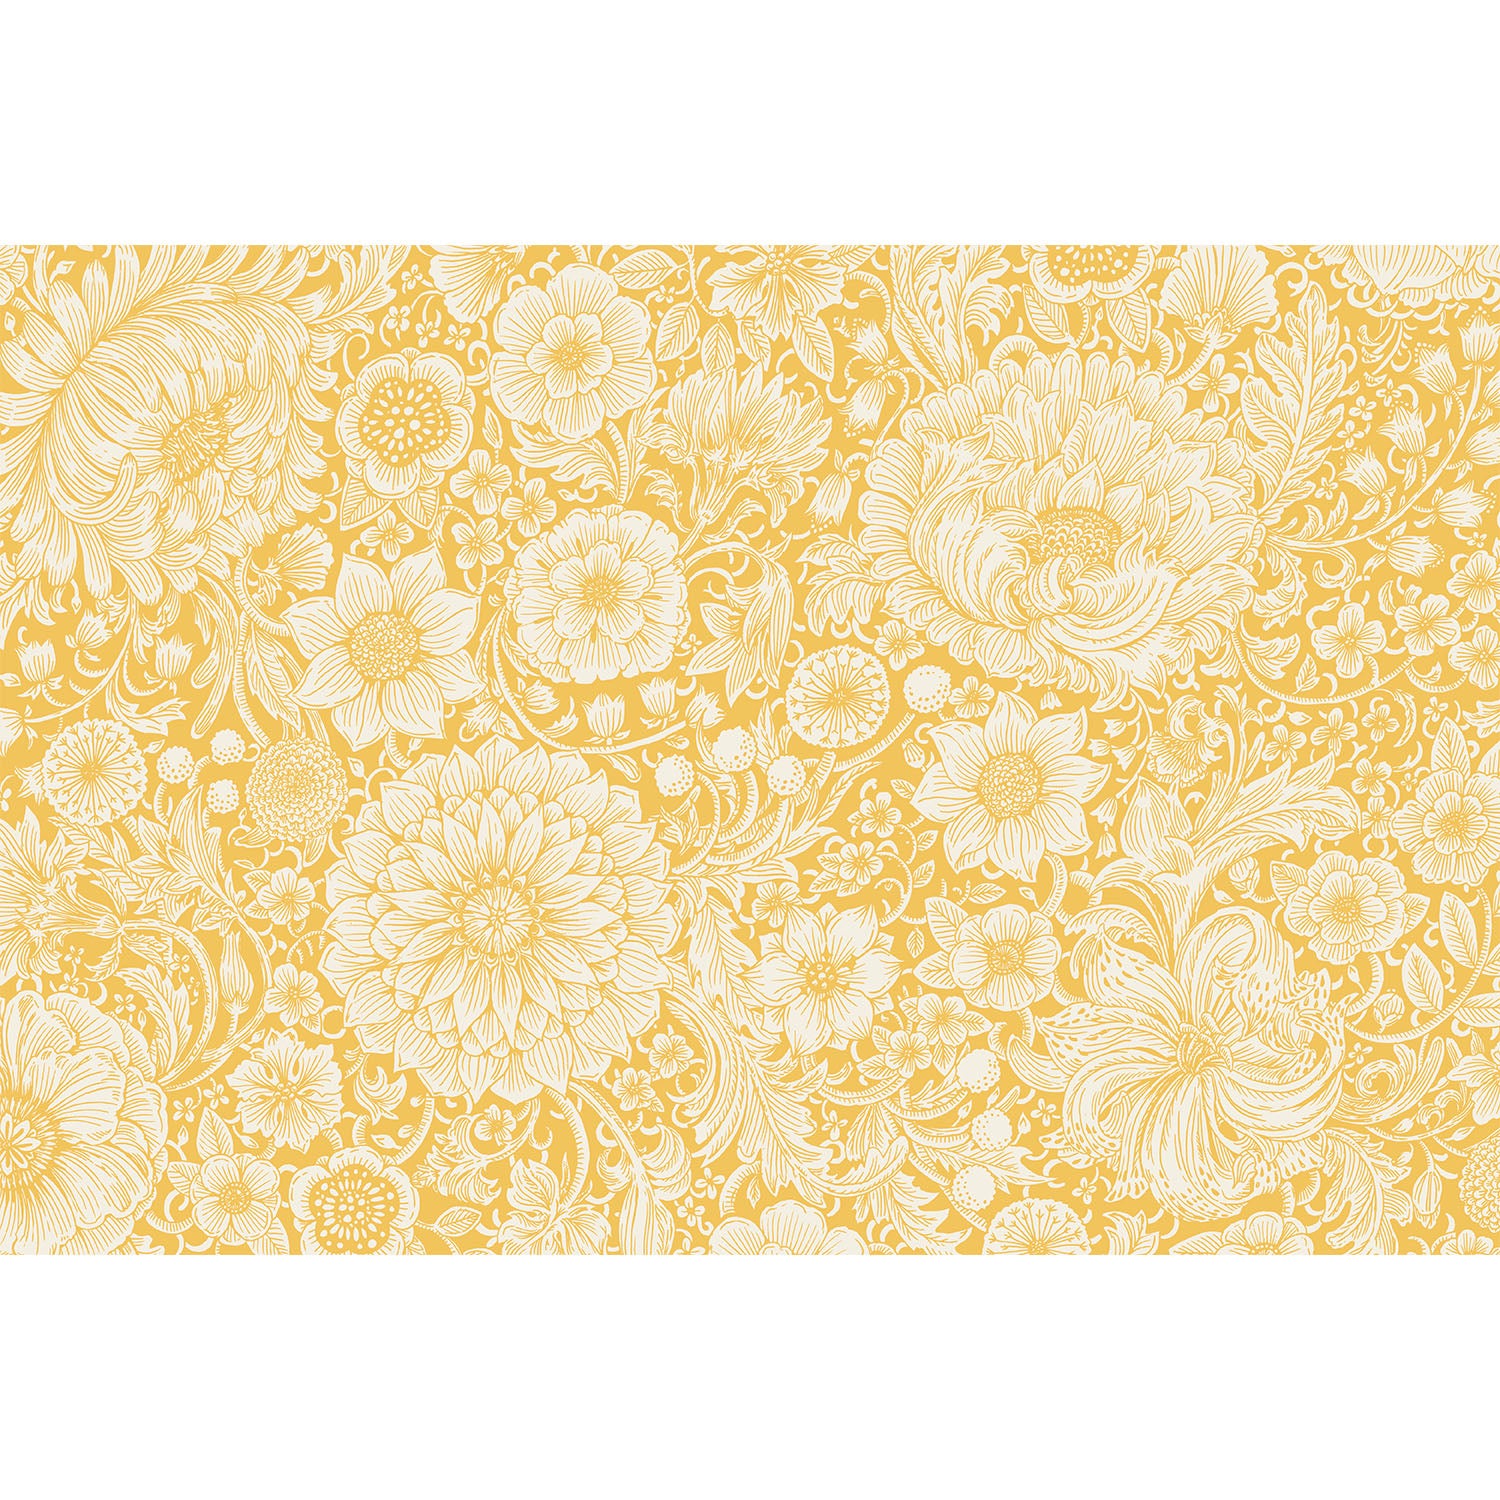 A yellow floral Spring Bouquet Placemat with white flowers, inspired by bohemian florals, by Hester &amp; Cook.